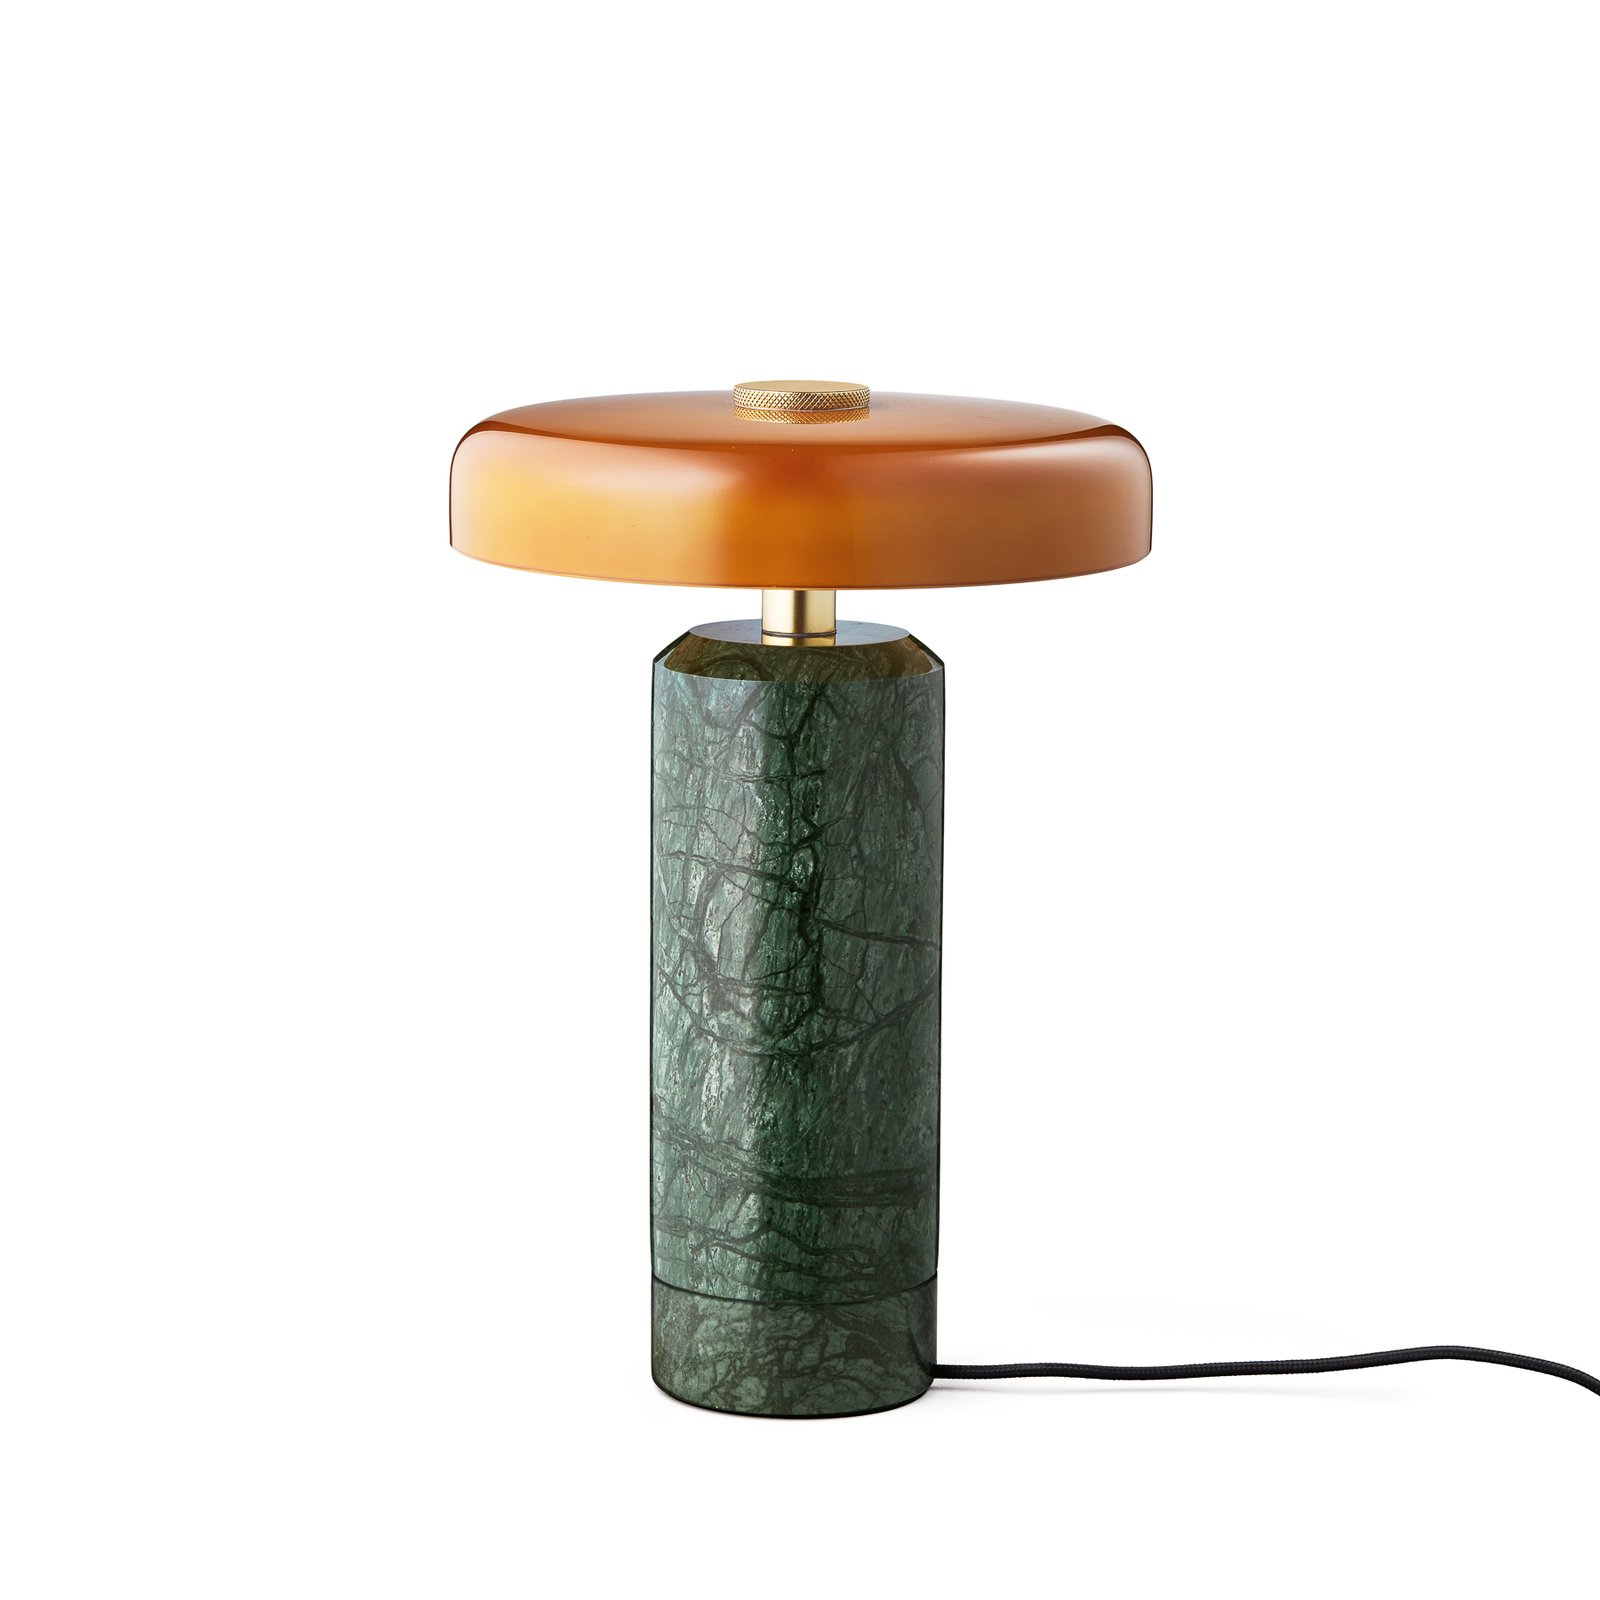 Trip LED rechargeable table lamp, green / orange, marble, glass, IP44